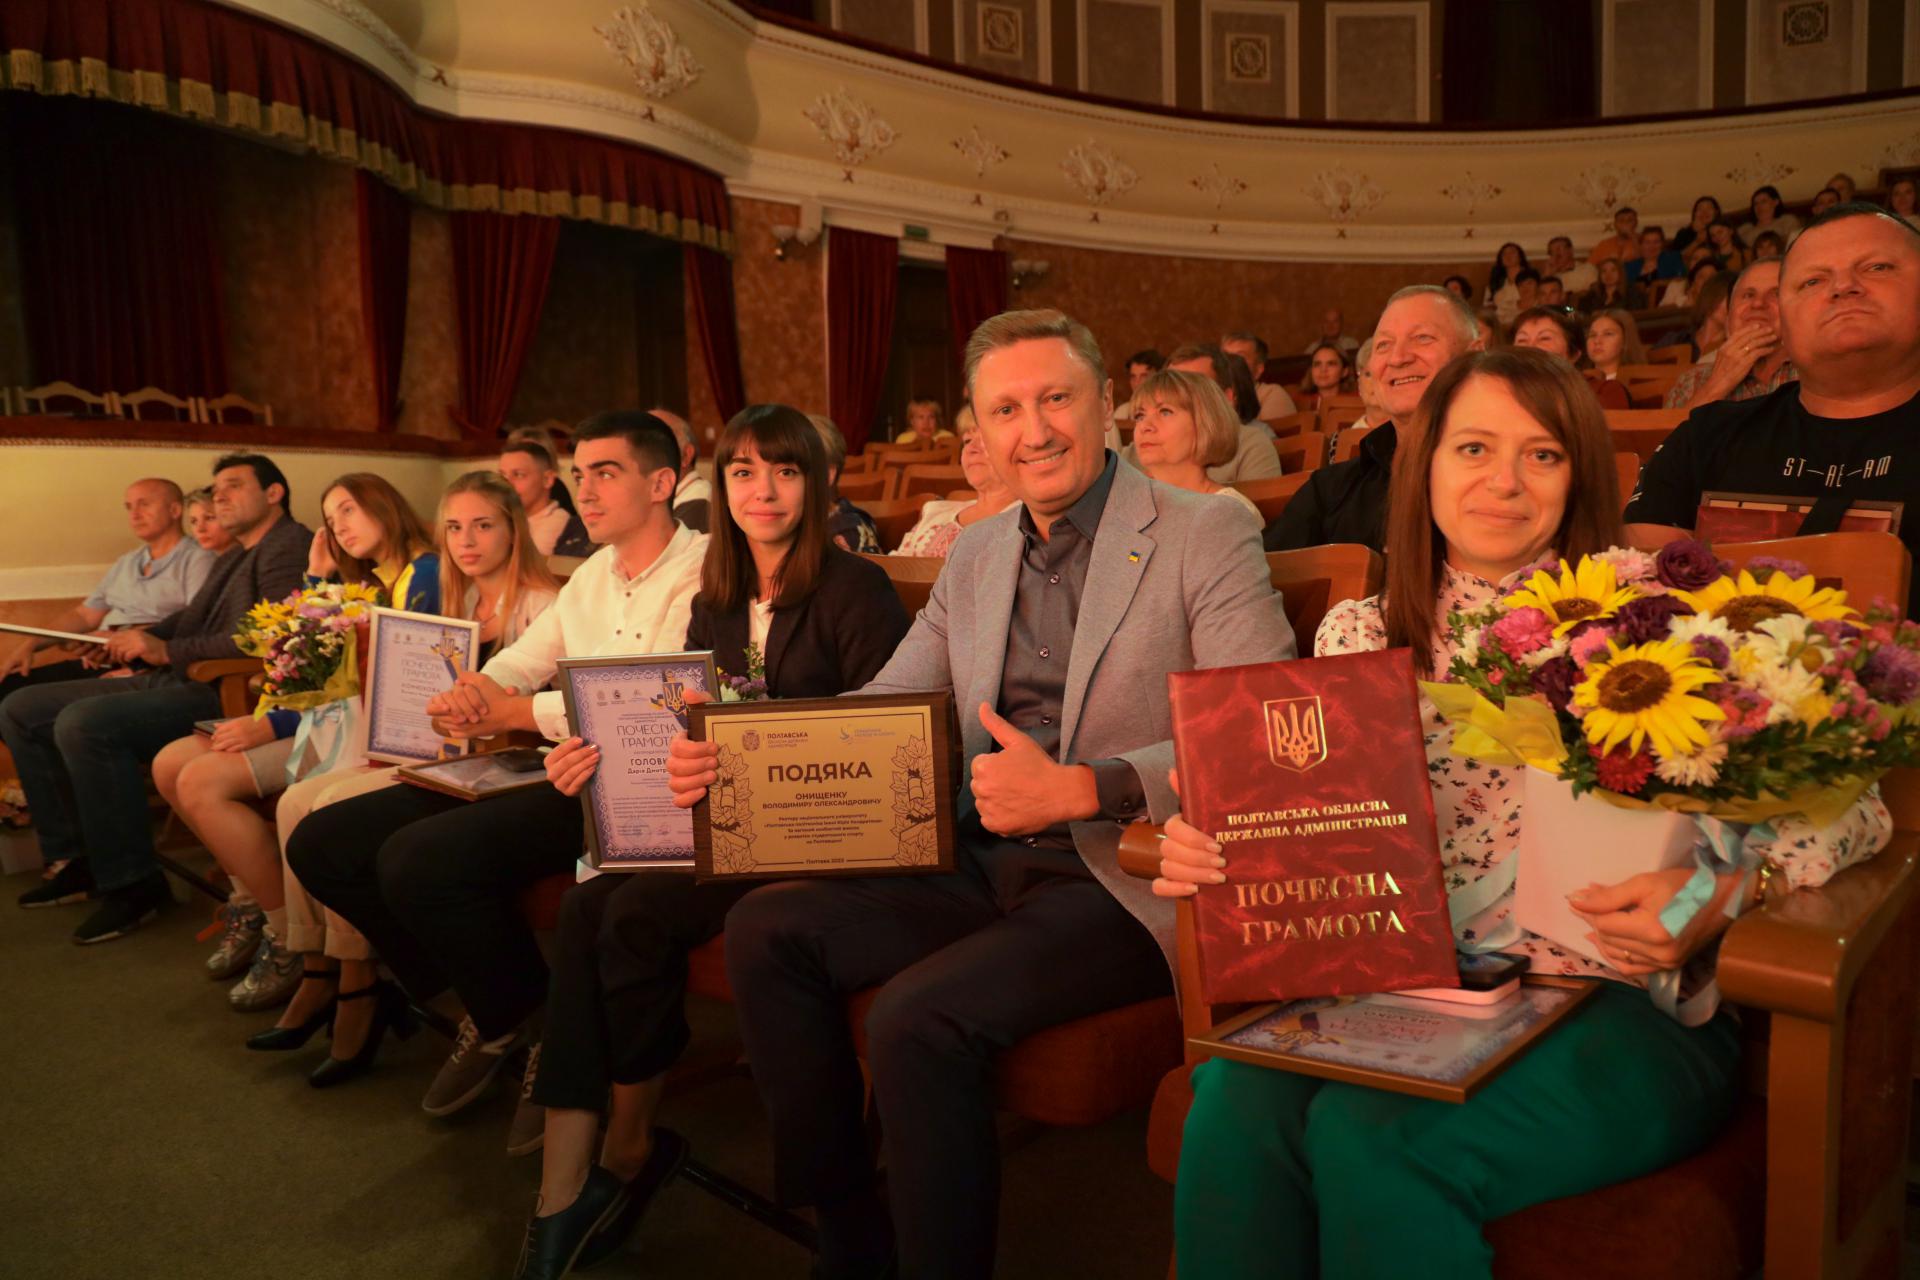 Scientists and students of Poltava Polytechnic received awards on the Day of Physical Cult...